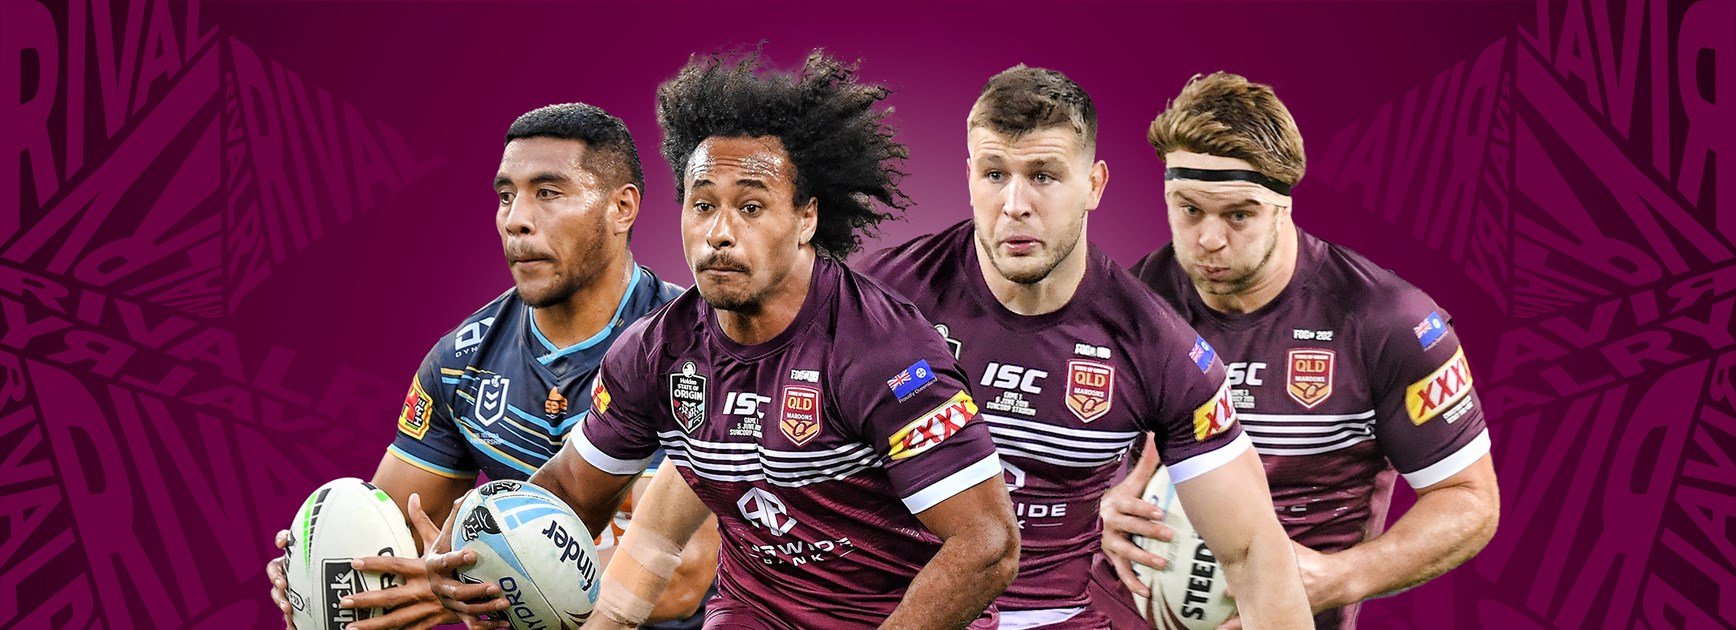 Ranking the Maroons forwards candidates for Origin 2020